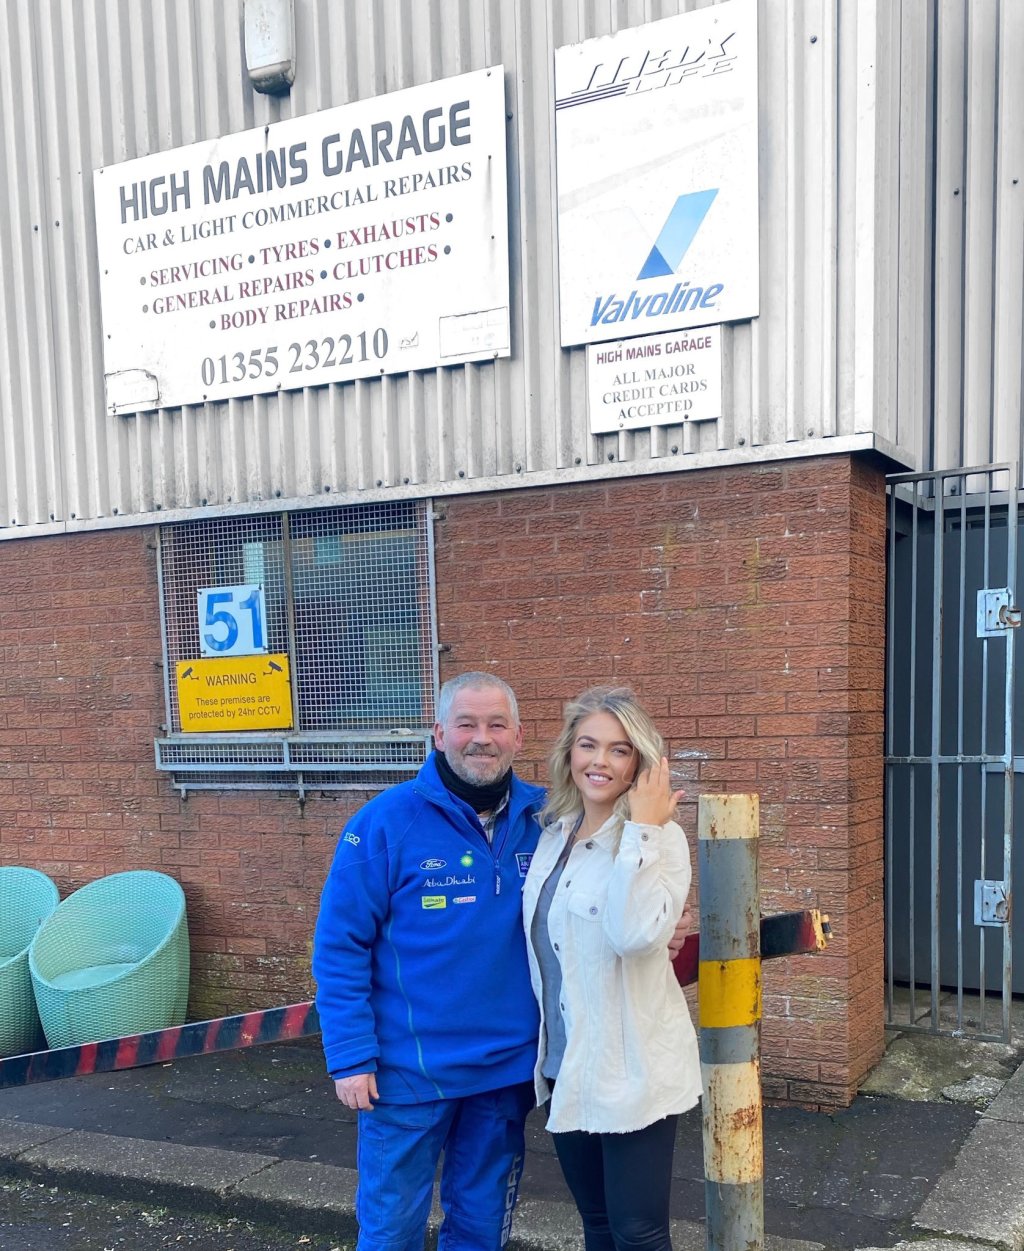 Jim Walsh and daughter Harley outside Highmains Garage in East Kilbride, Scotland. Image credit: Supplied